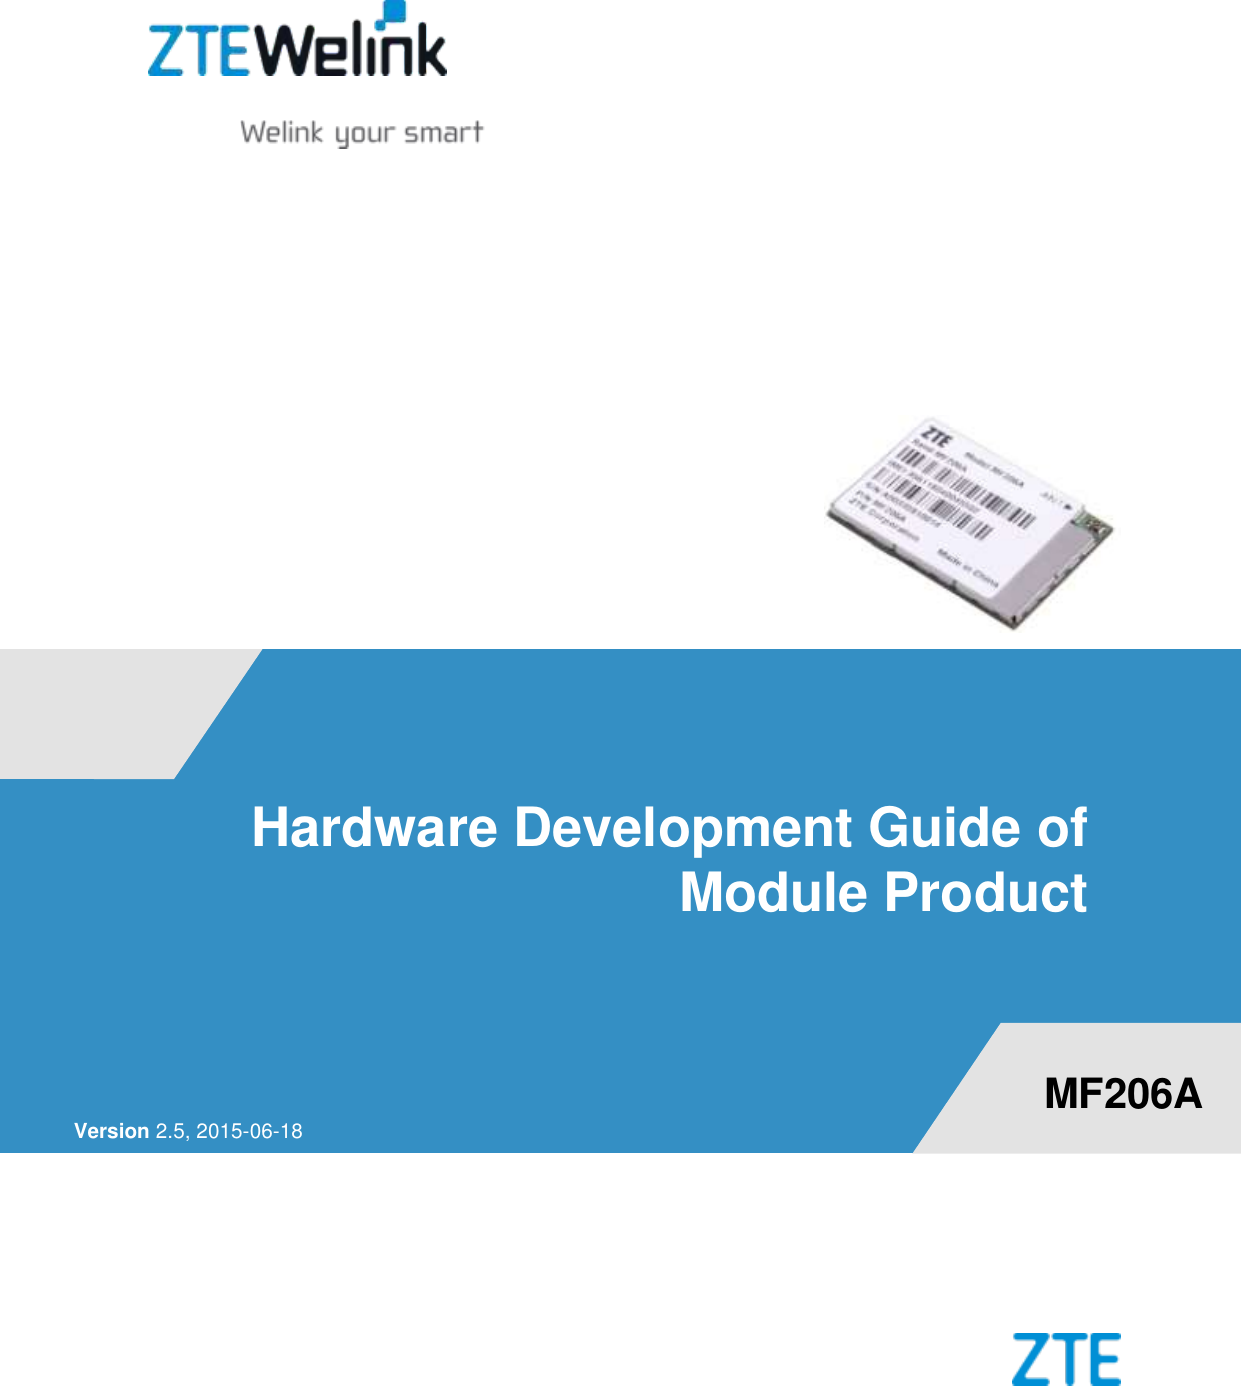                         Hardware Development Guide of Module Product    Version 2.5, 2015-06-18 MF206A 